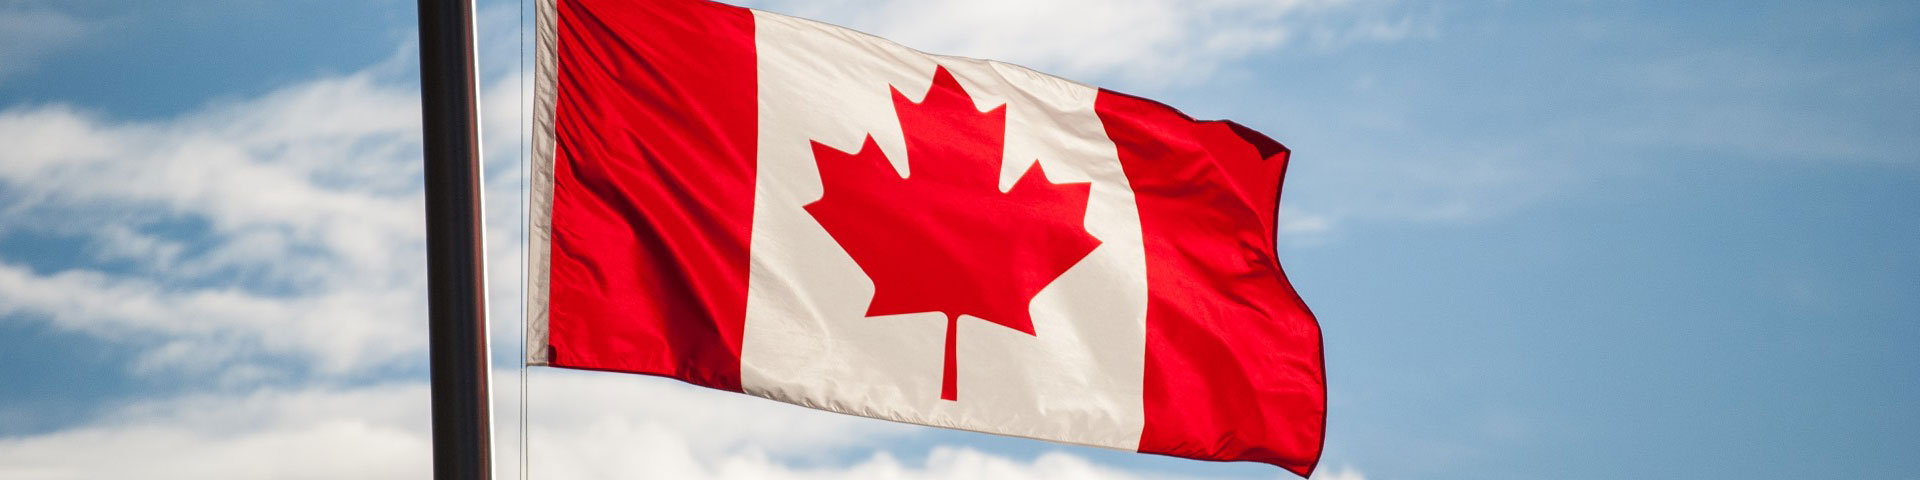 Canadian flag on a mast flying in the wind